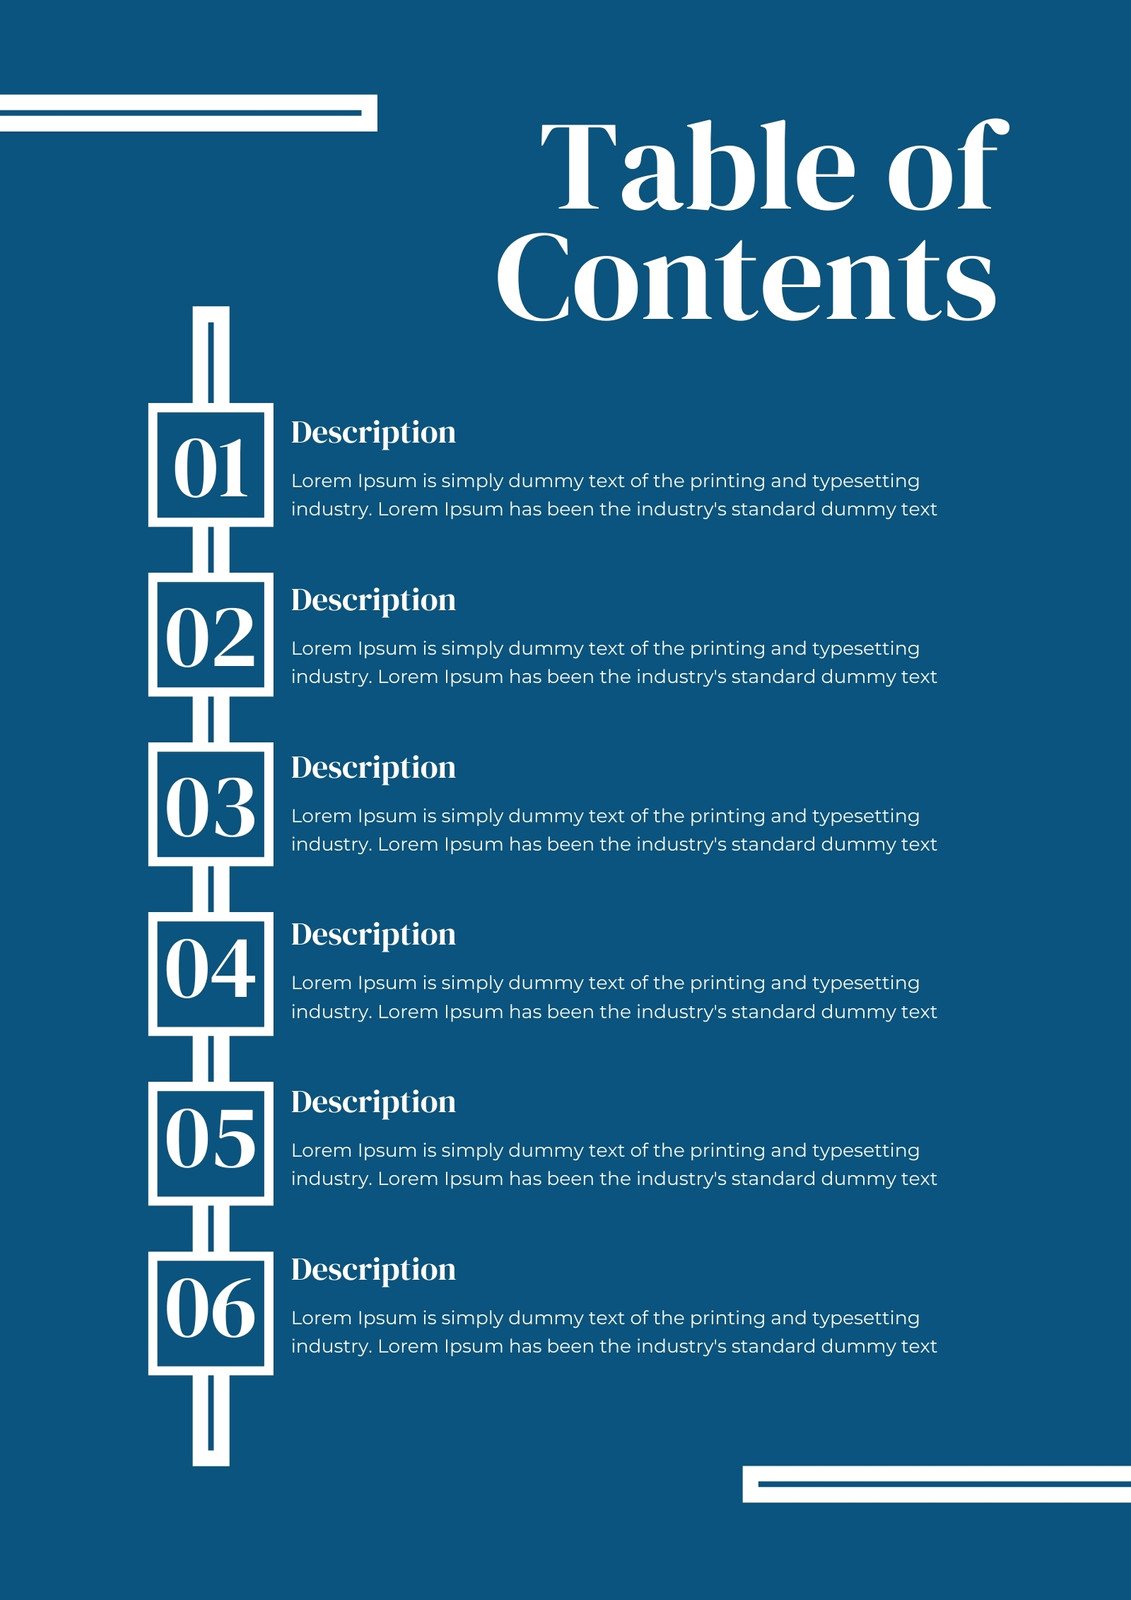 Free and customizable table of contents templates | Canva